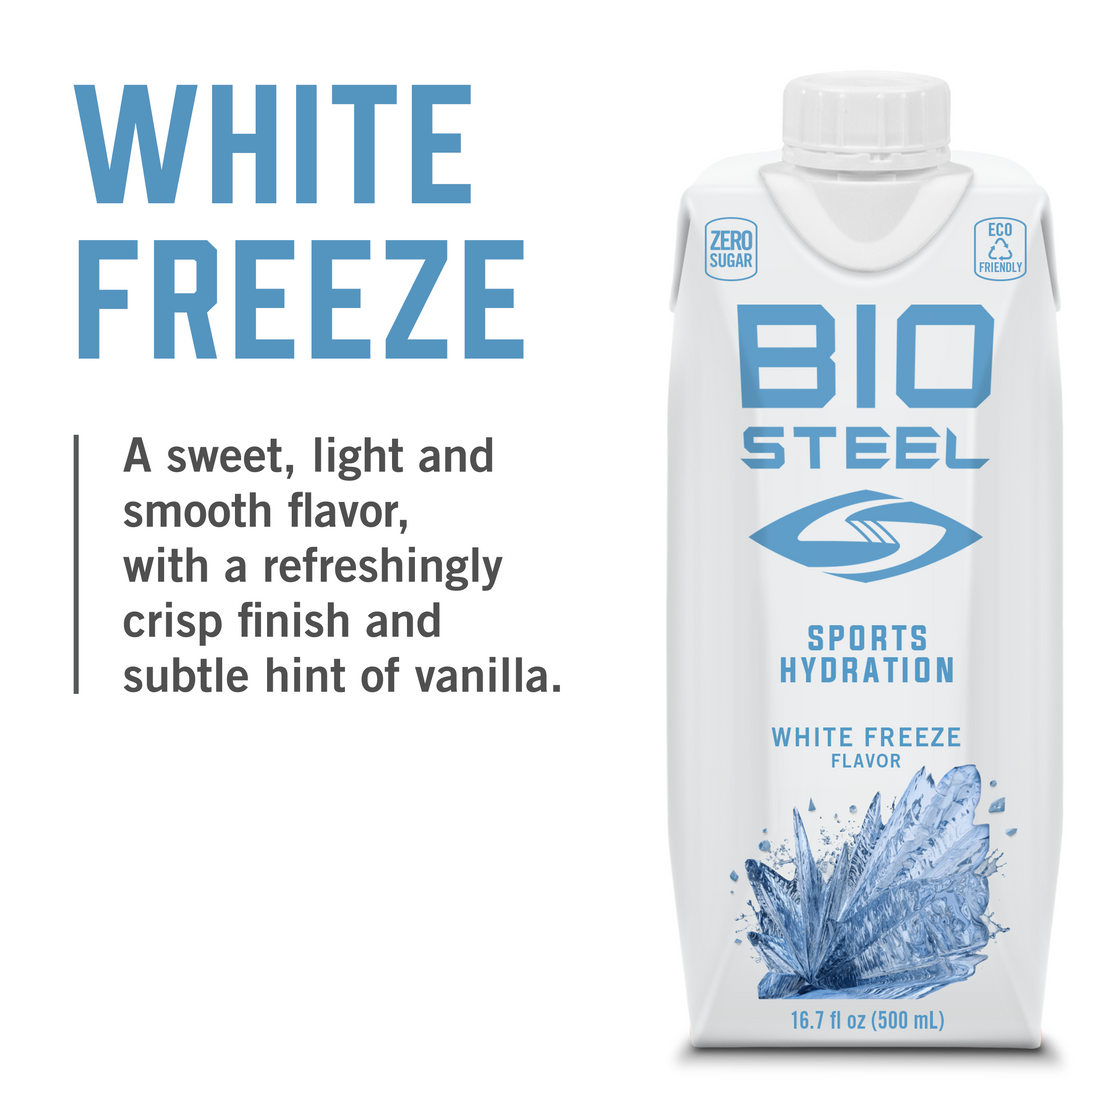 SPORTS DRINK / White Freeze - 12 Pack